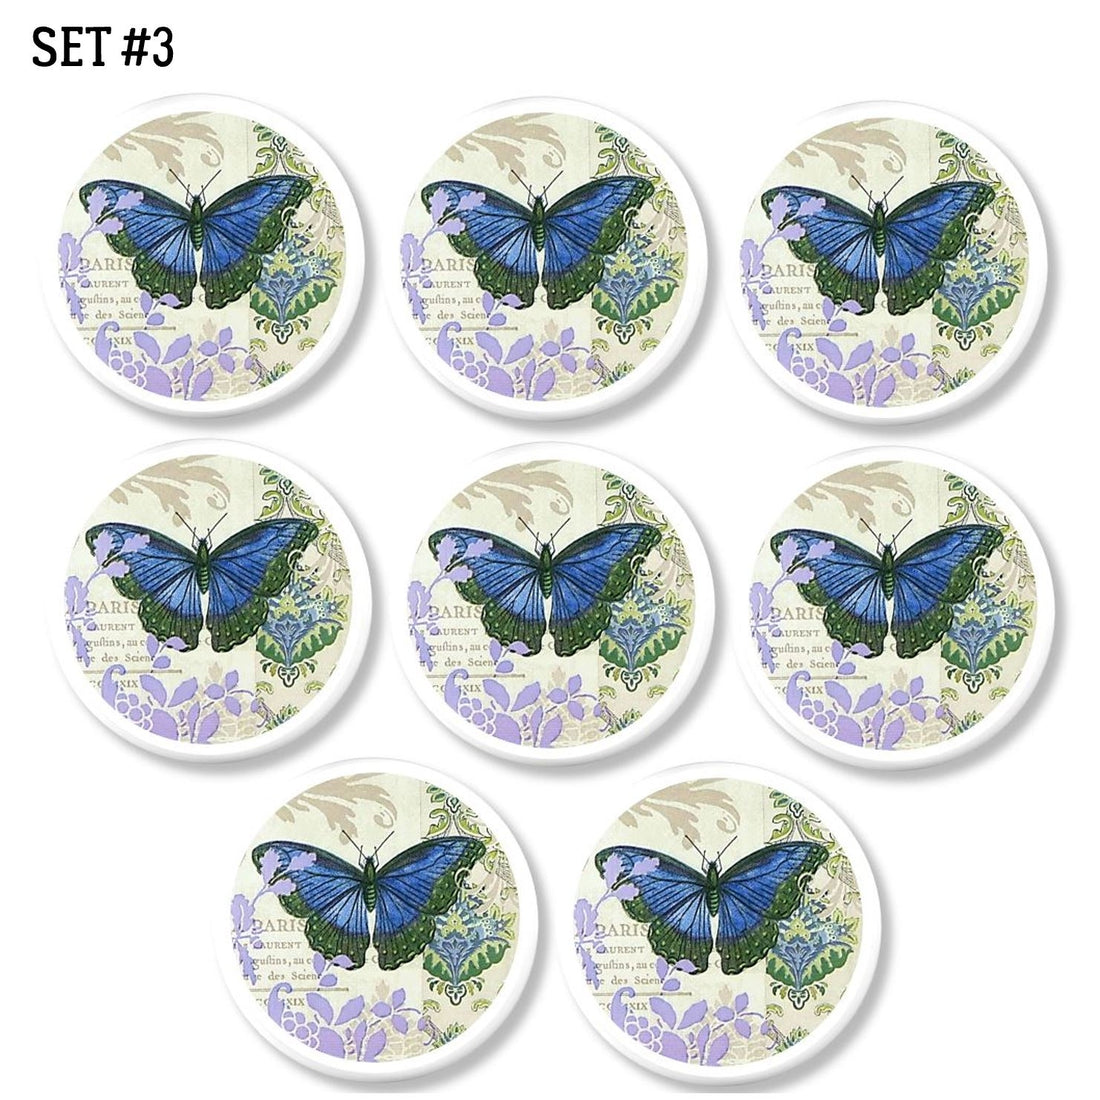 8 Handmade butterfly themed dresser knobs. Teen girl furniture drawer pull in blue, purple green and cream.